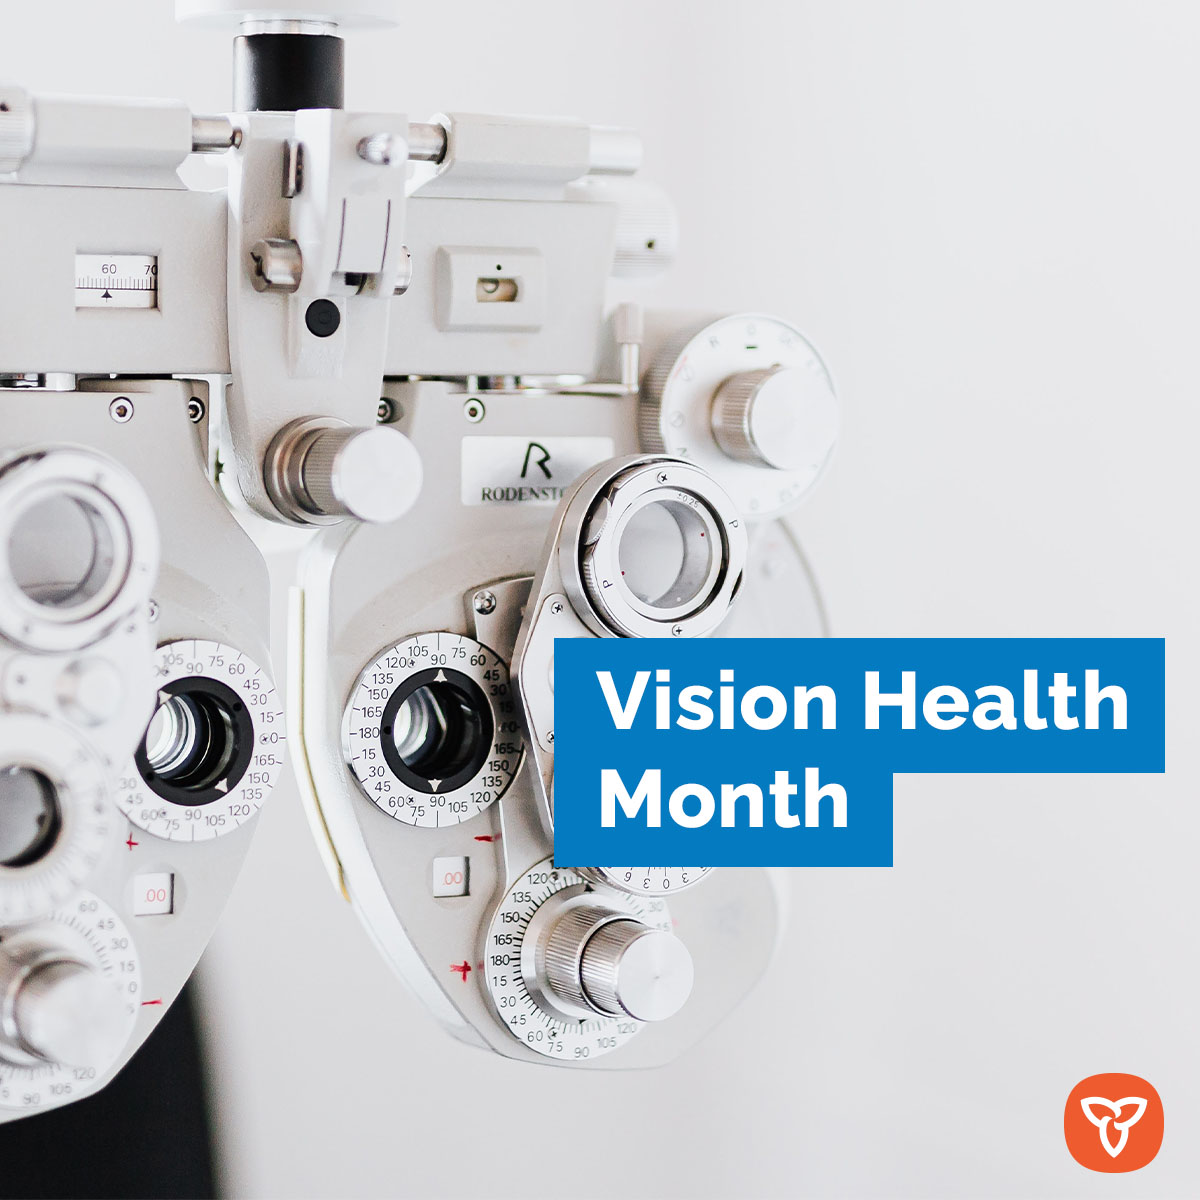 Routine eye exams ensure your vision health is in optimal shape. OHIP covers 1 eye exam every 12 months if you are 20 to 64 years old with an eligible medical condition. If you are 65 and older, 1 eye exam is covered every 18 months. ontario.ca/page/what-ohip… @ONThealth